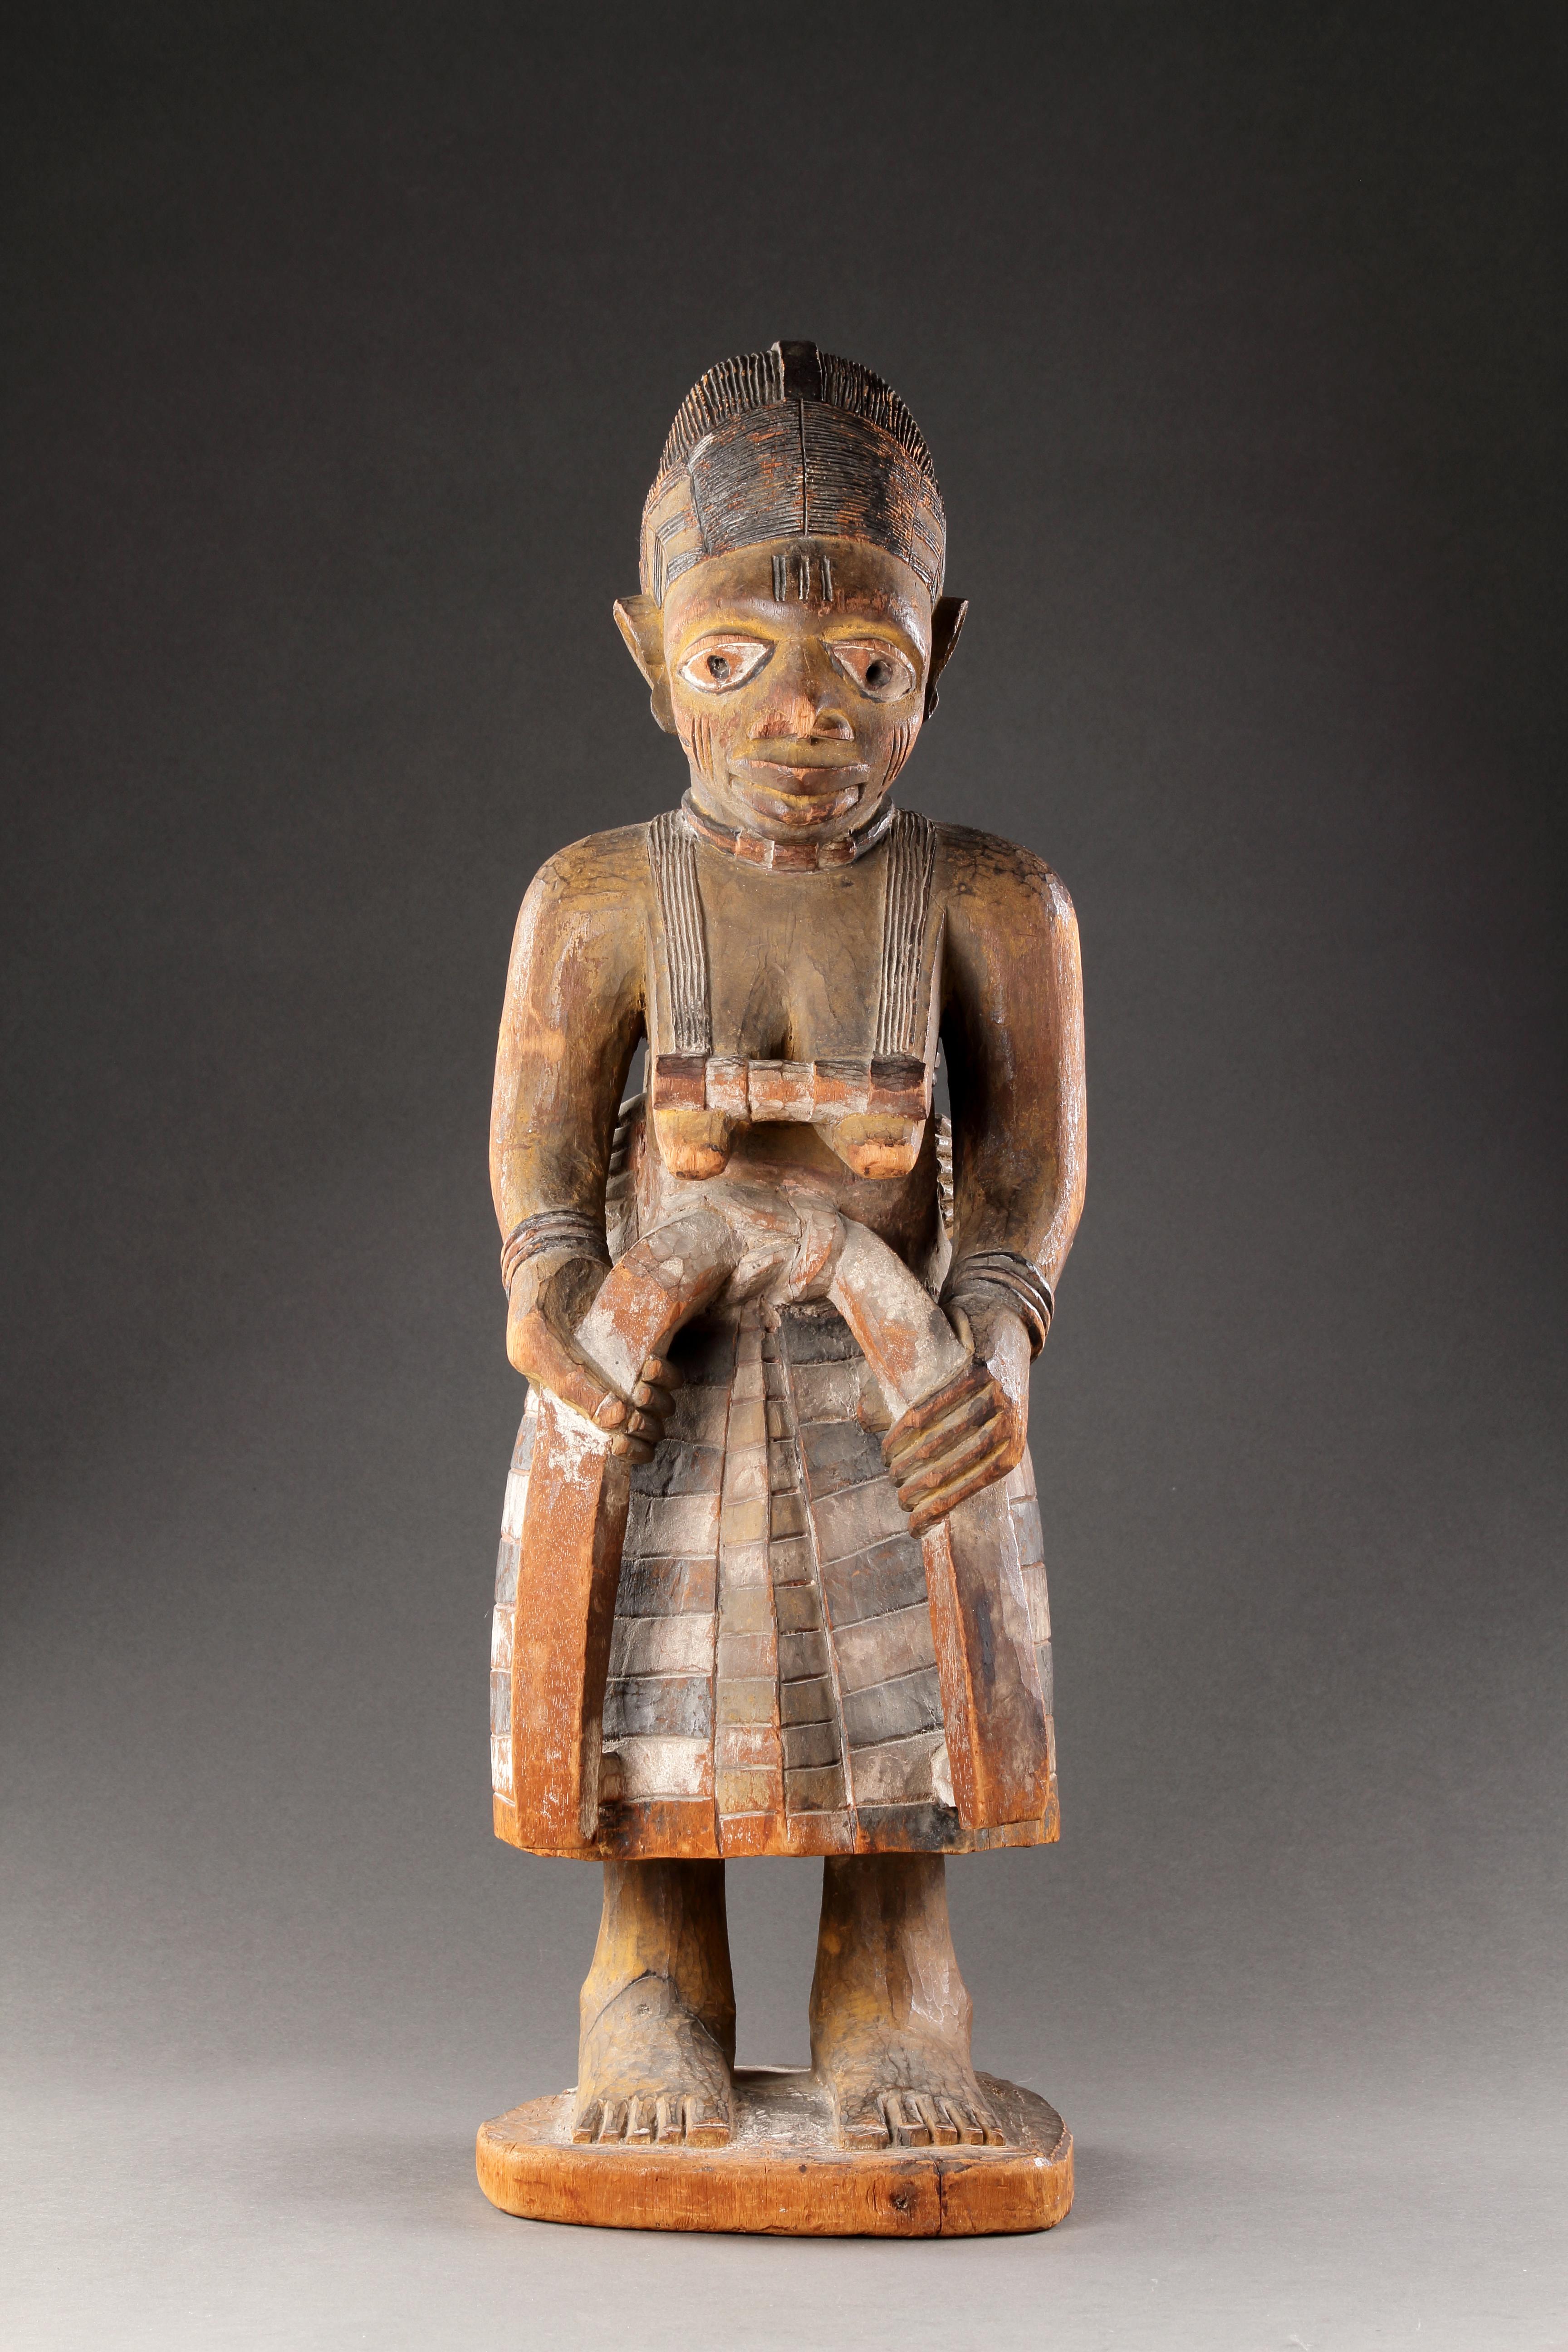 Yoruba Maternity Group 
Wood, polychrome, pigment, scorching
Old collection name to base: ‘Sealy’ and ‘16.’ 
Nigeria 
Late 19th Century 

SIZE: 58cm high - 22¾ ins high 

PROVENANCE:
Ex Ernest Ohly collection
Ex Berkeley Gallery, London 
Purchased